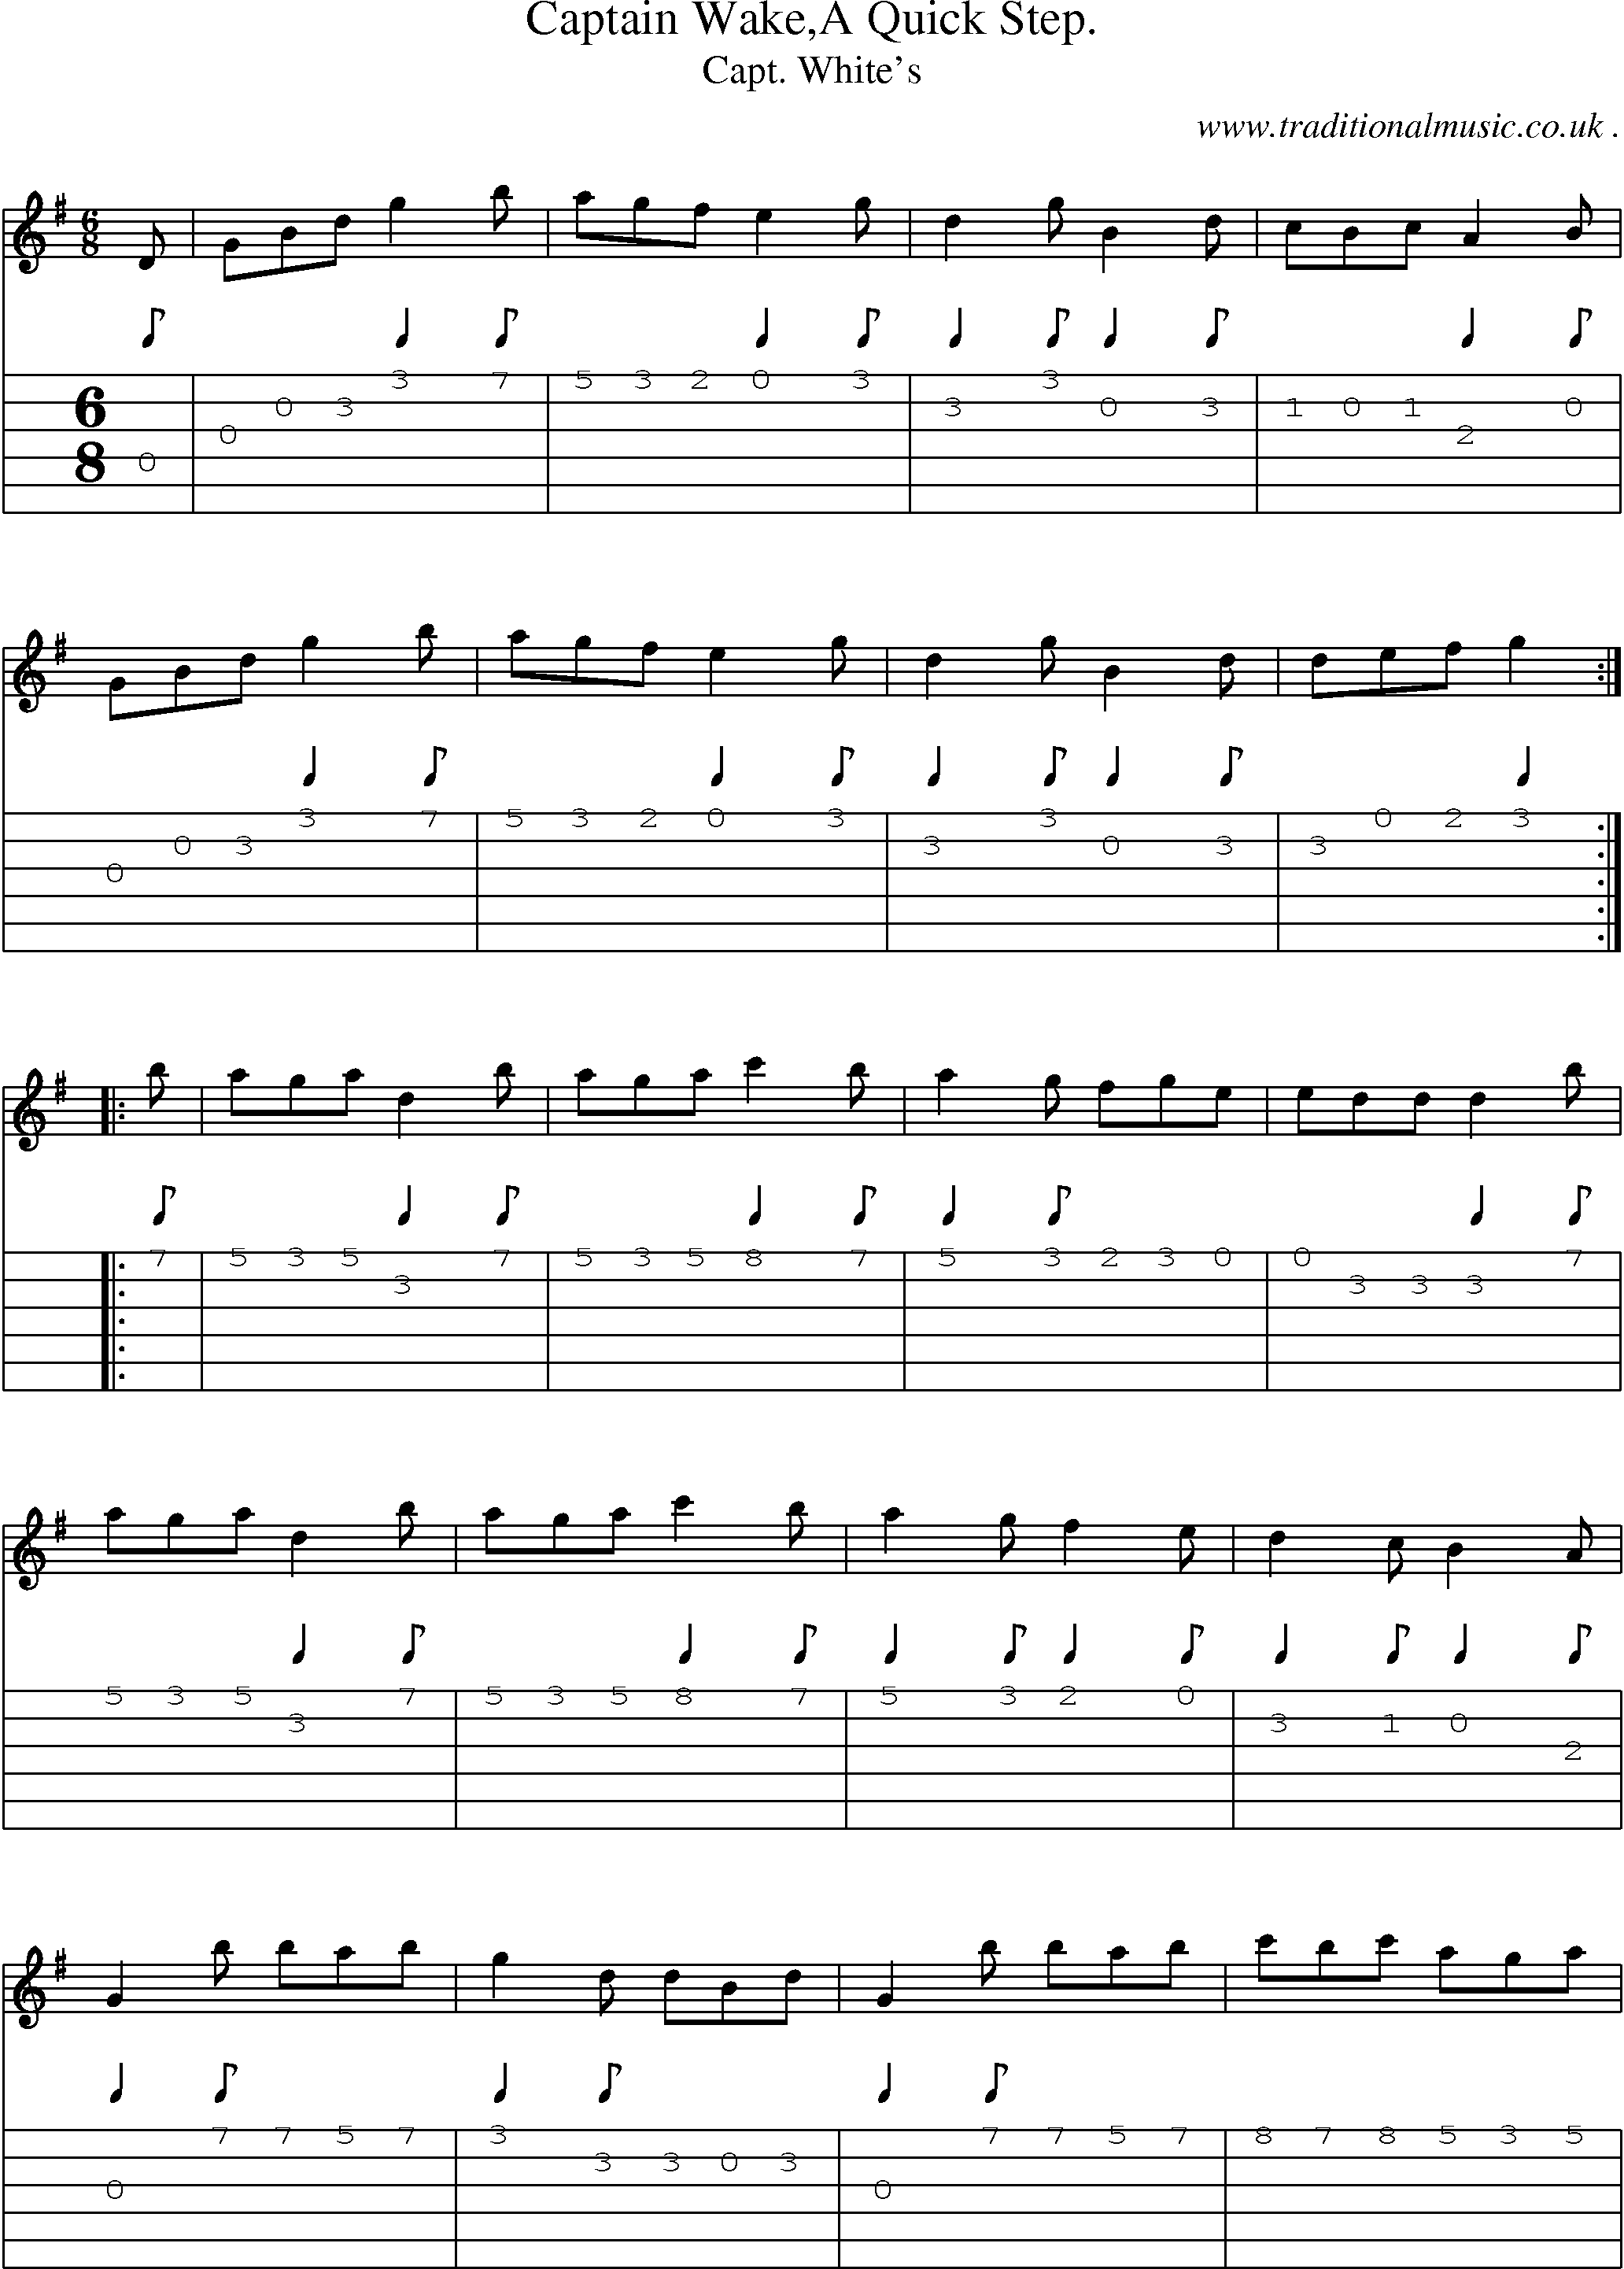 Sheet-Music and Guitar Tabs for Captain Wakea Quick Step